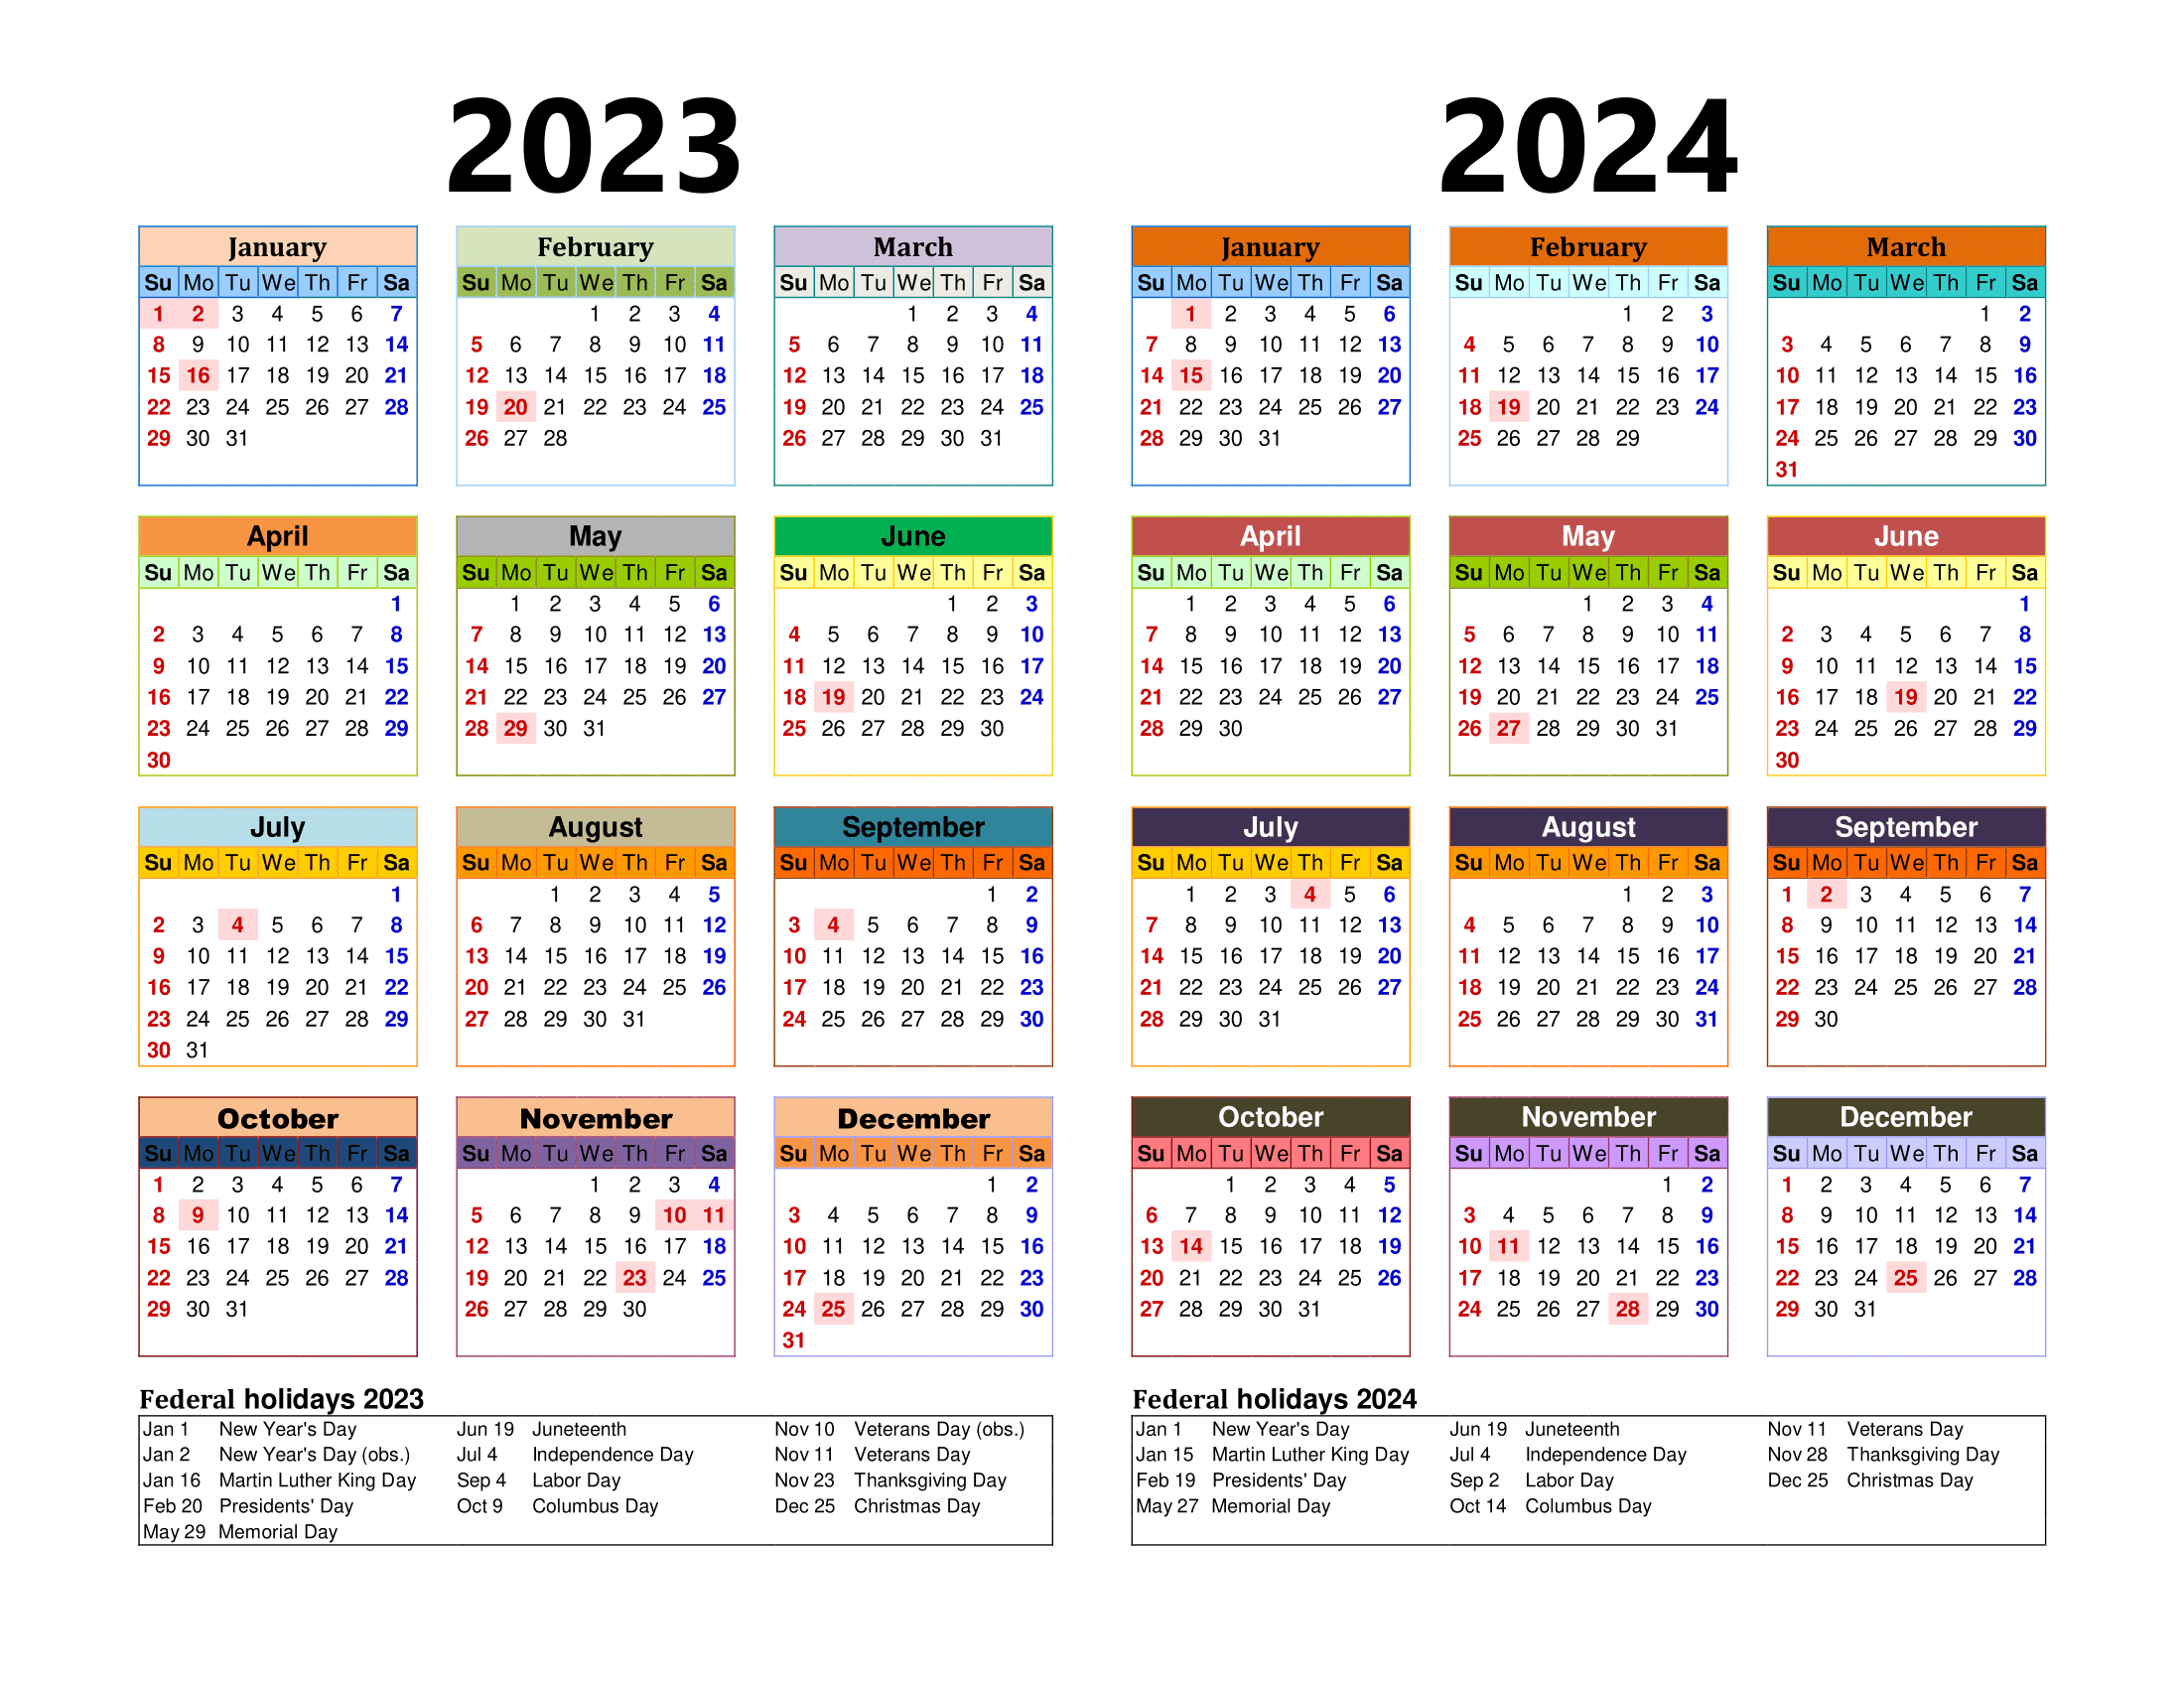 Free Printable Two Year Calendar Templates For 2023 And 2024 In Pdf | Yearly Calendar 2023 And 2024 Printable